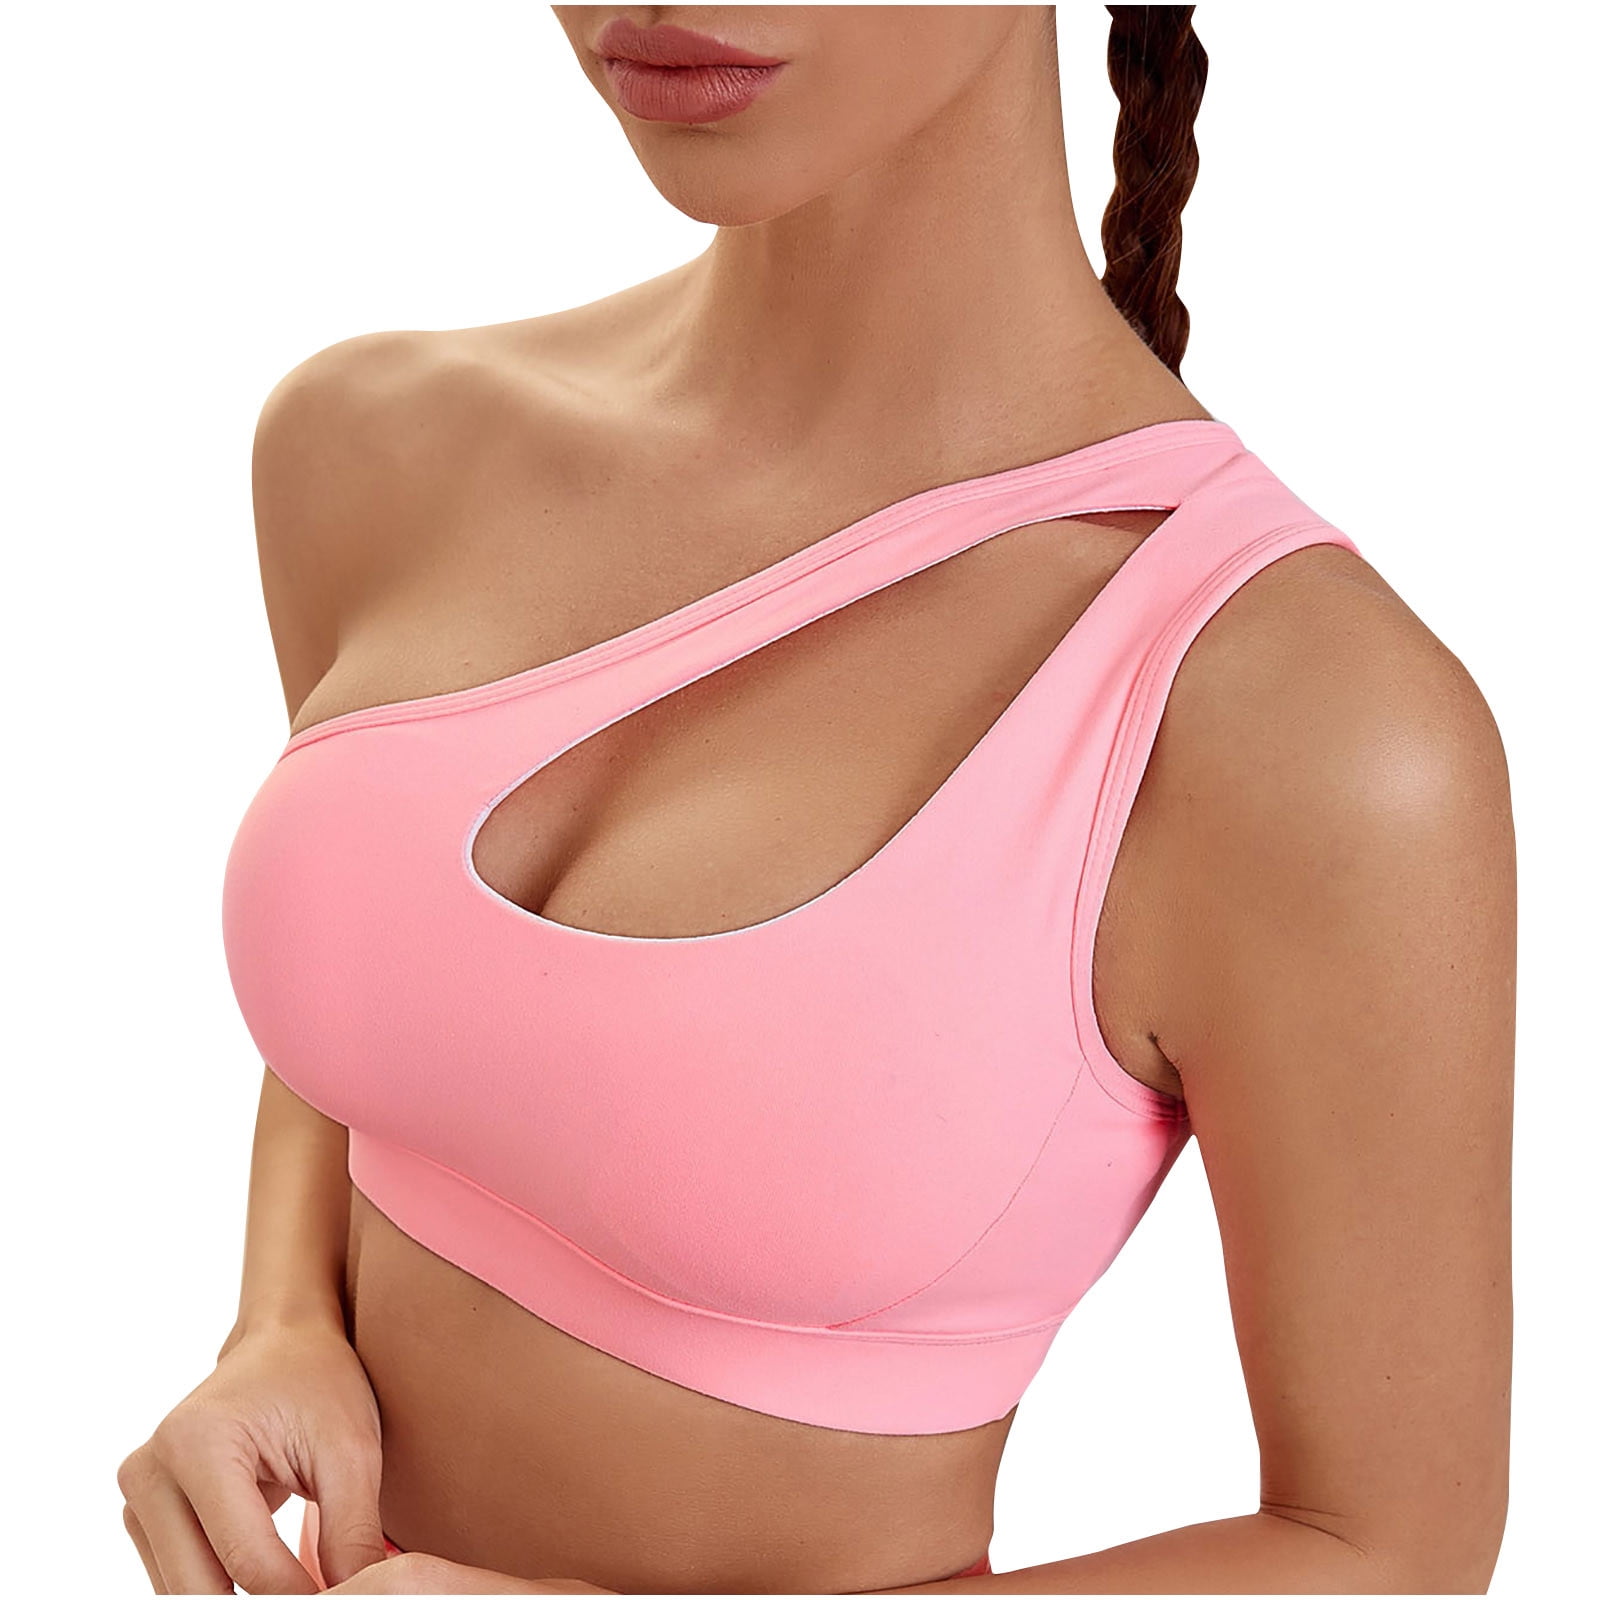 Mrat Clearance Clear Strap Bras for Women Clearance Women's One